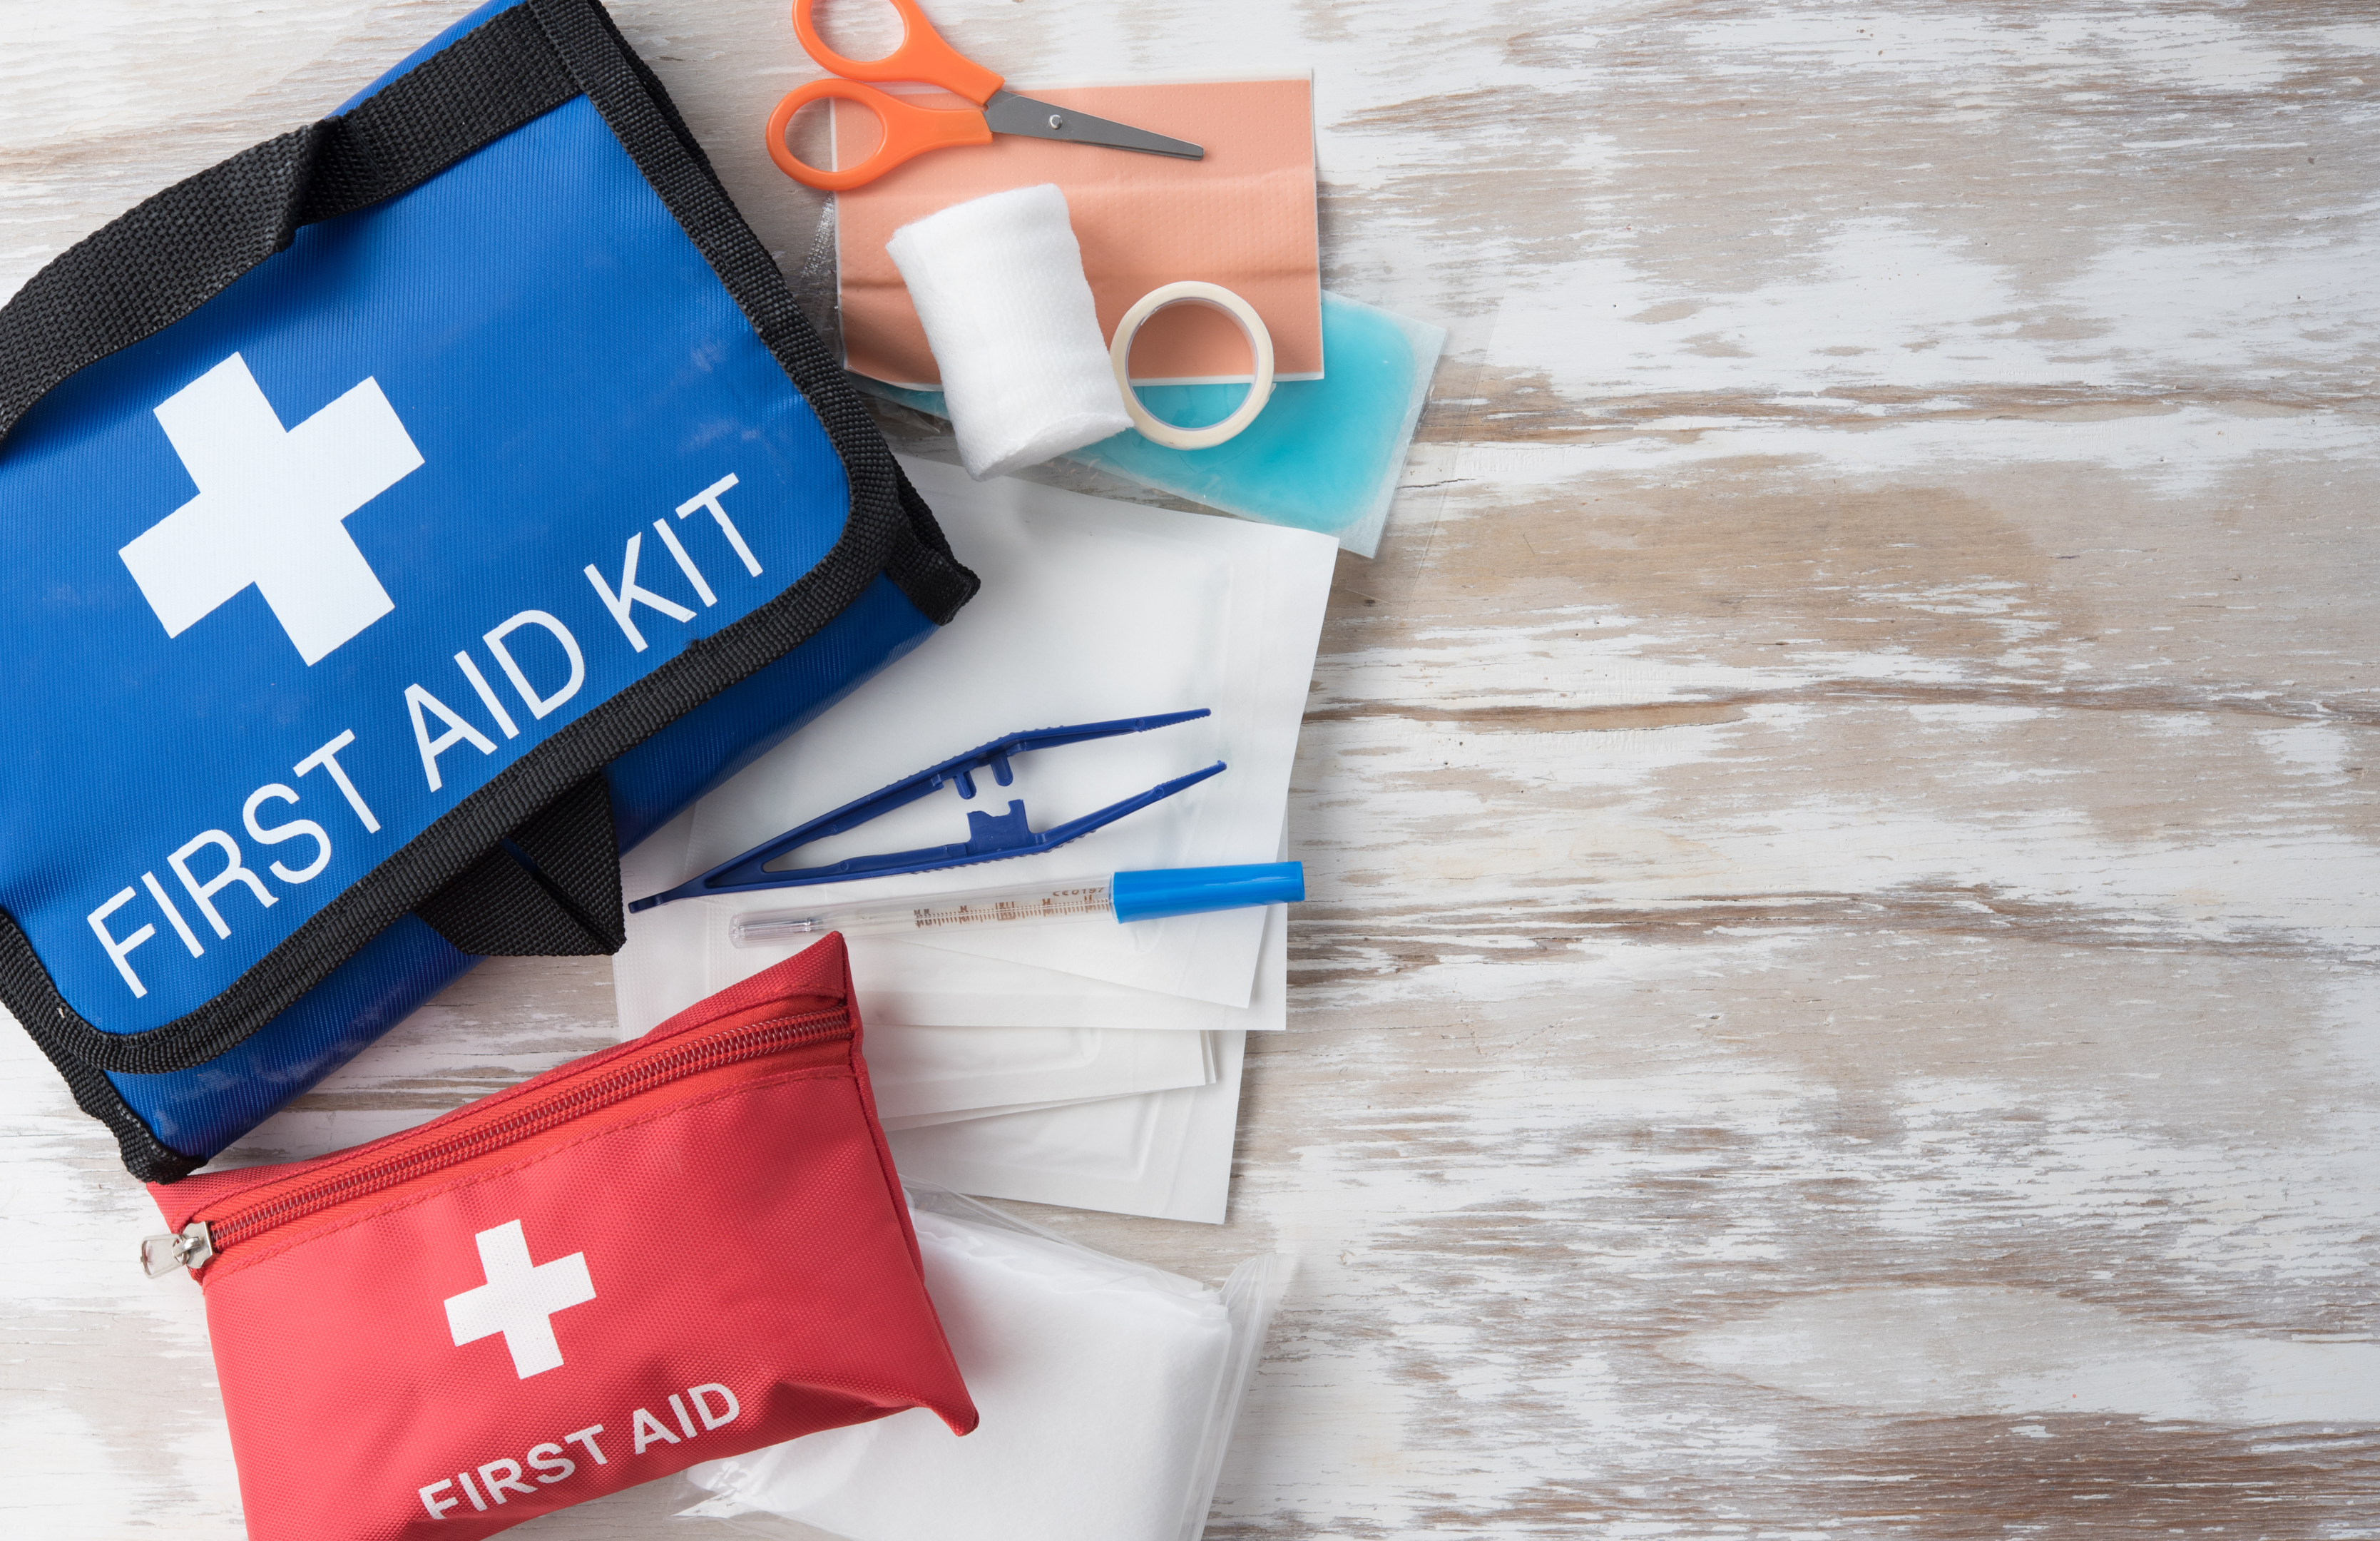 First aid kit - short courses available - two year diploma - hospitals